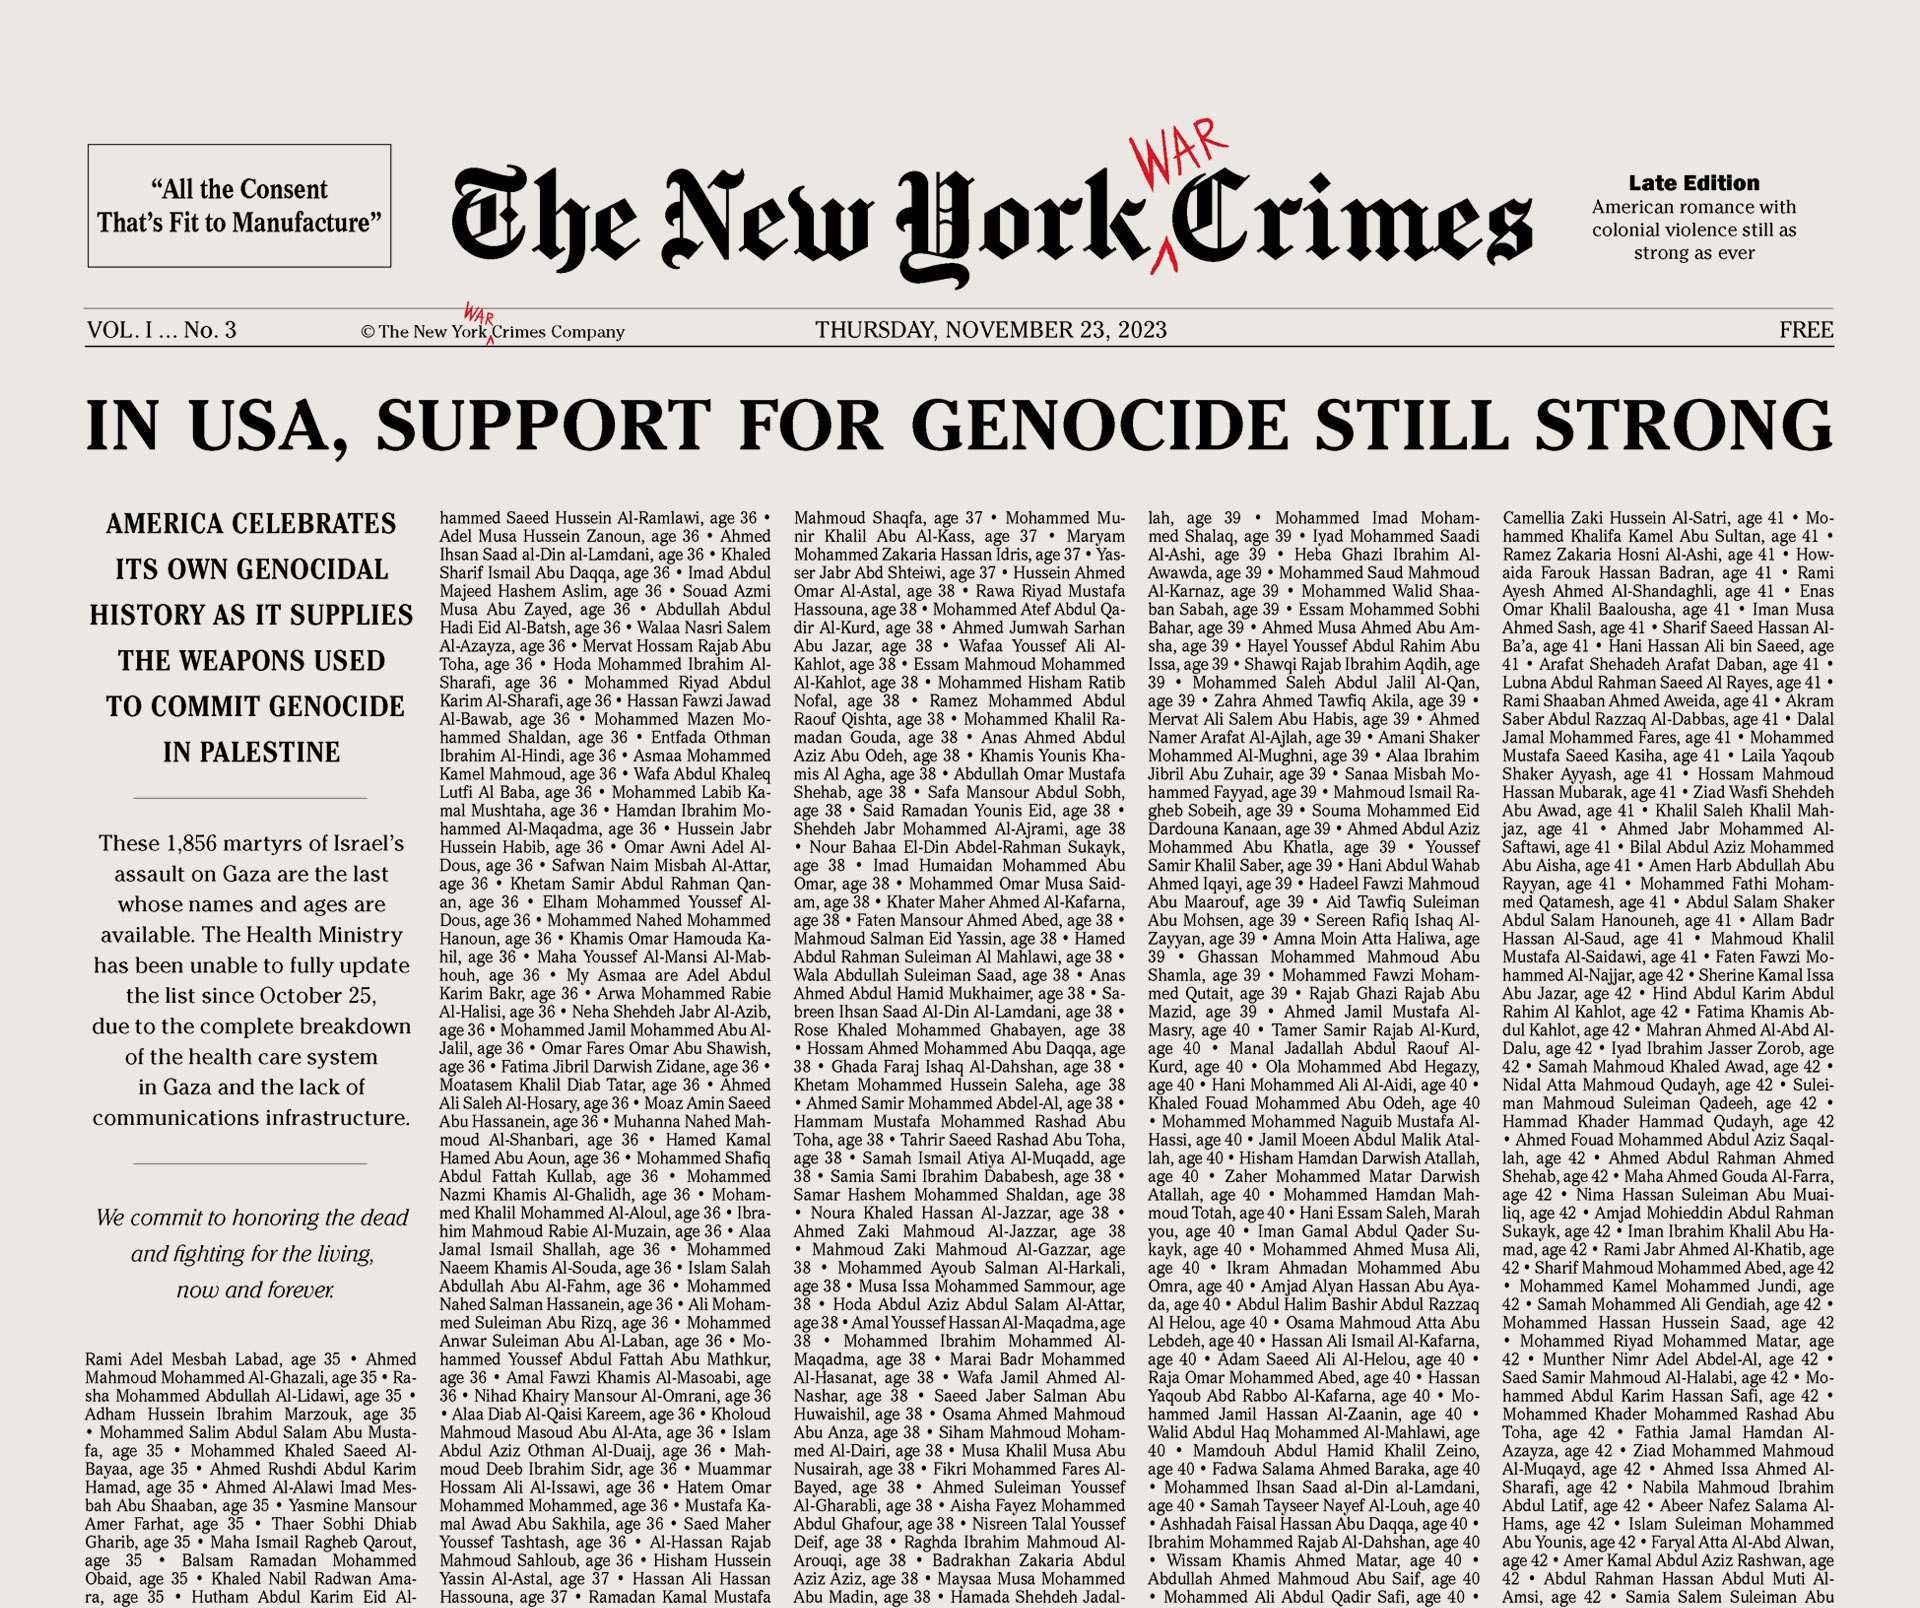 https://newyorkwarcrimes.com/media/pages/print-issue-vol-i-no-3-in-usa-support-for-genocide-is-still-strong/ec19820b18-1709308050/ny-crimes-03-cover.jpg